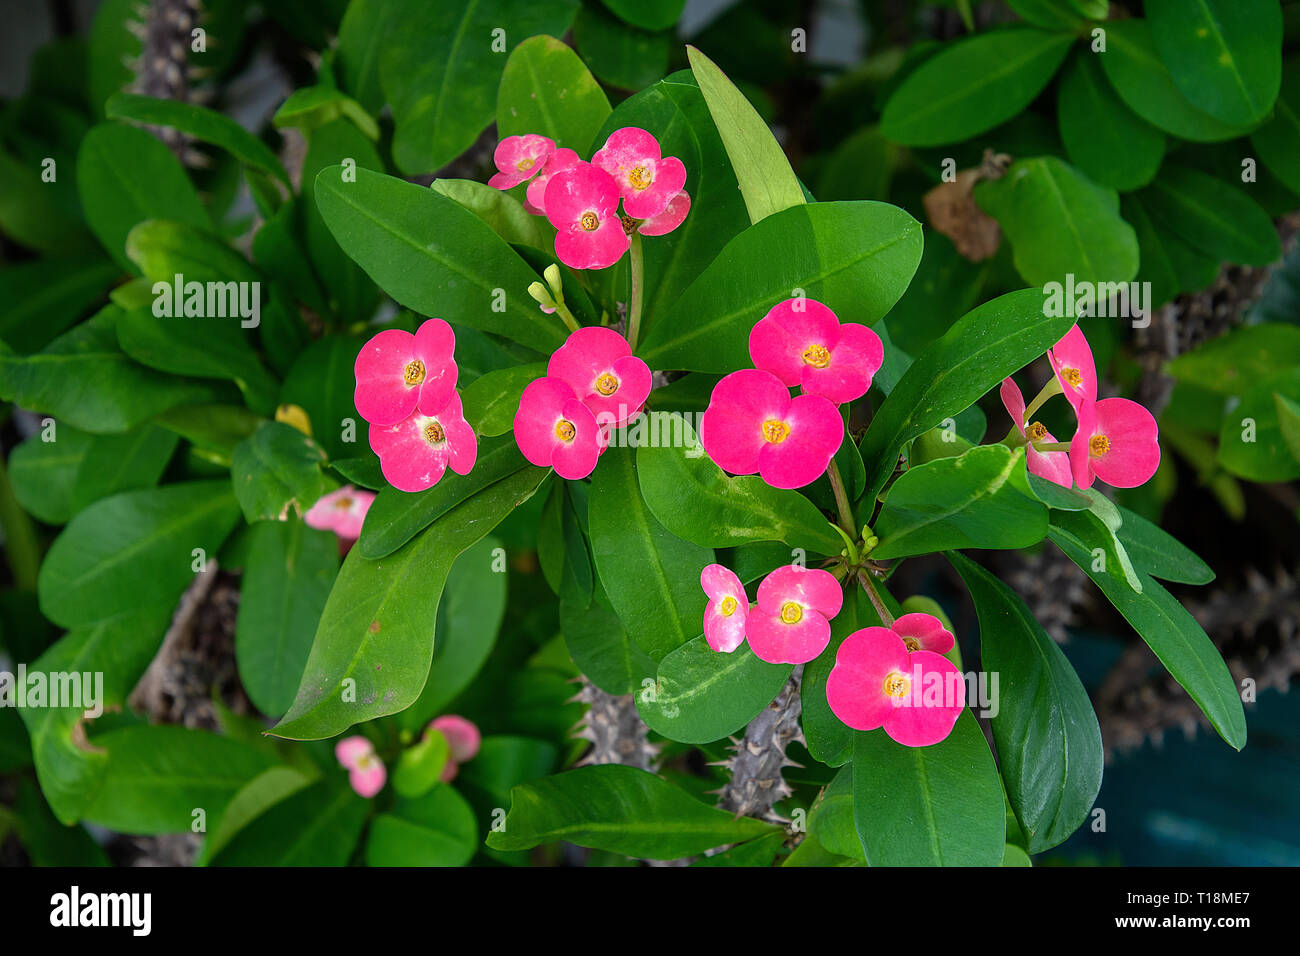 bright pink blossoms on crown of thorns plant Stock Photo